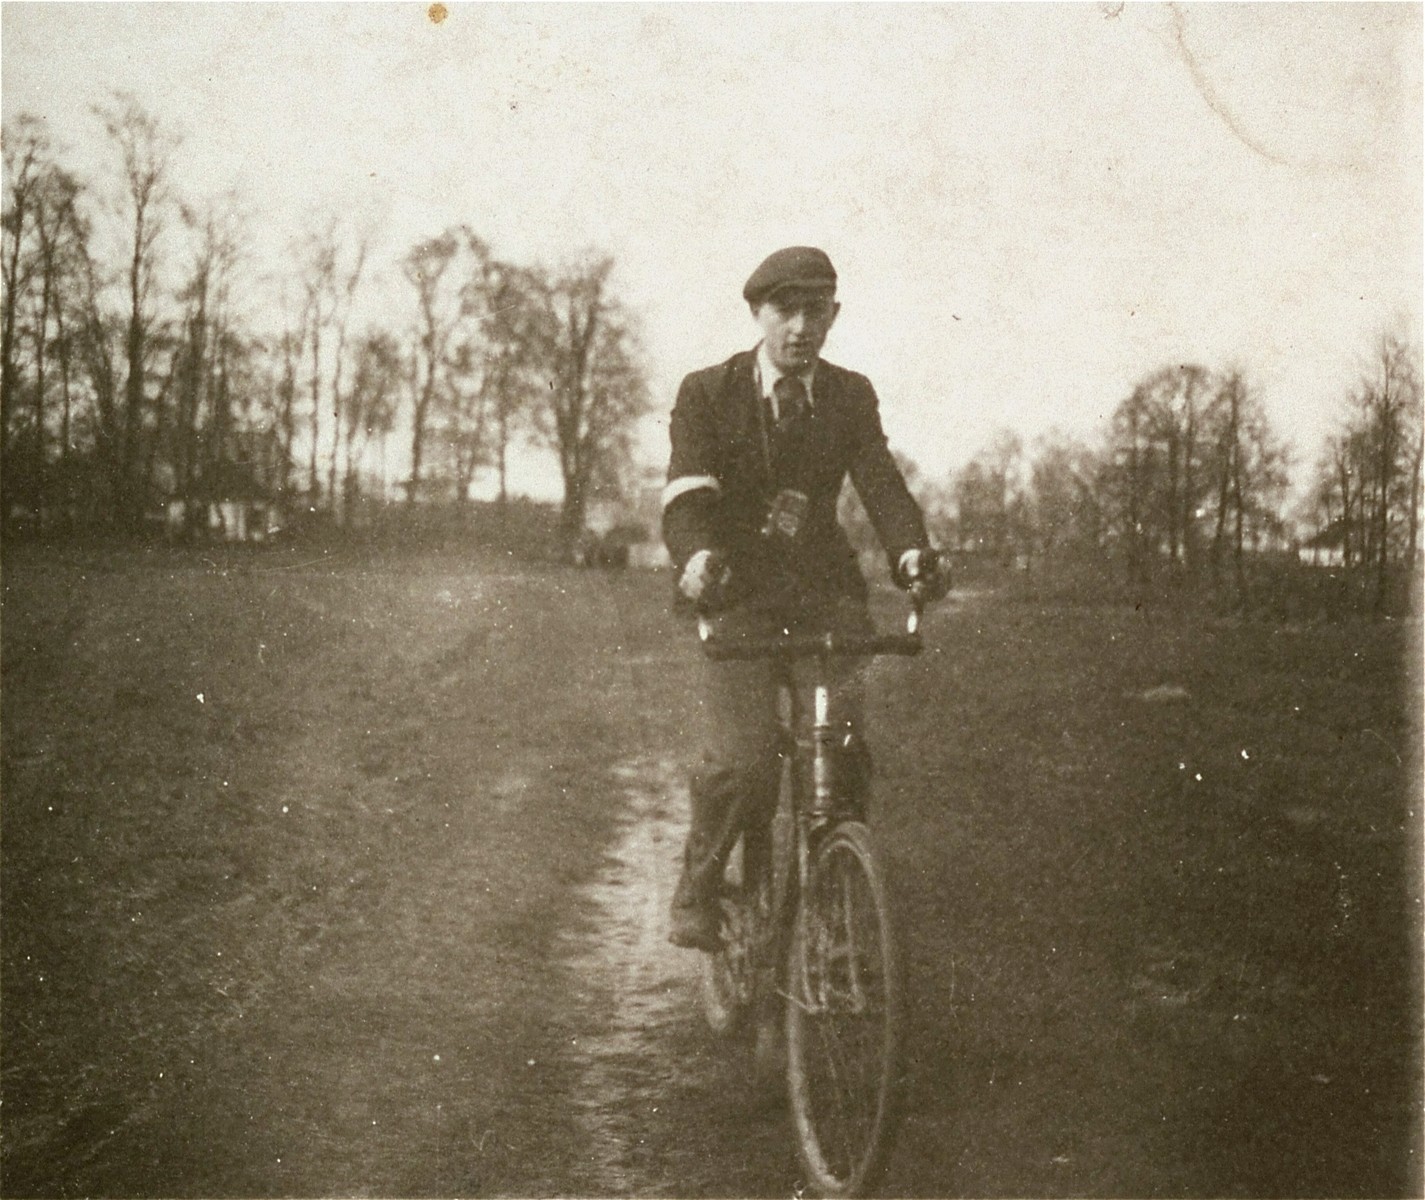 A Jewish boy rides a bicycle in the Kolbuszowa ghetto.
 
Pictured is Mondi Stub, a friend of Manius Notowicz, the donor.